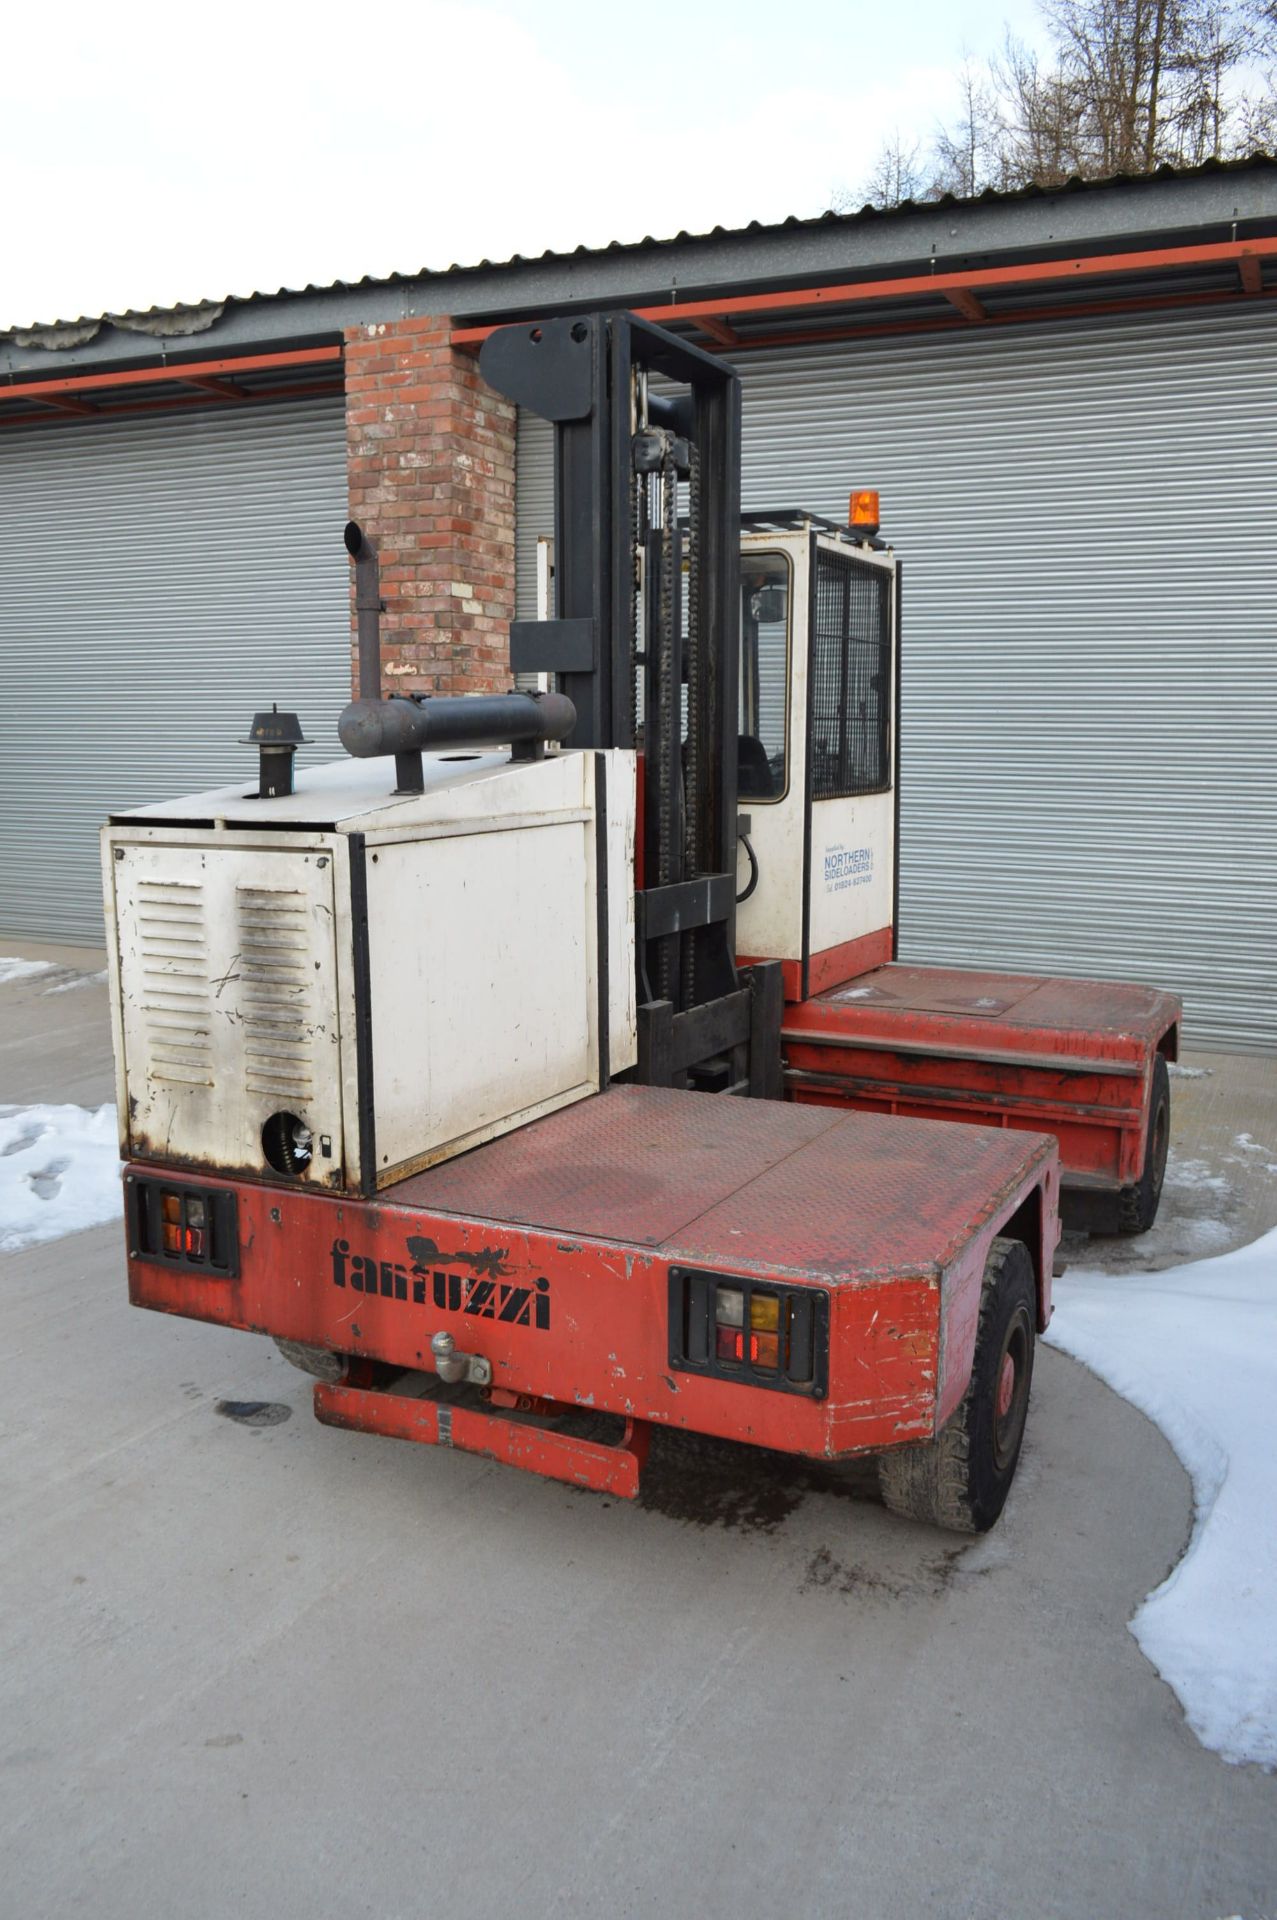 Fantuzzi SF40 40L SERIES 2000 4000kg CAPACITY SIDELOAD FORK LIFT, serial no. 42163, year of